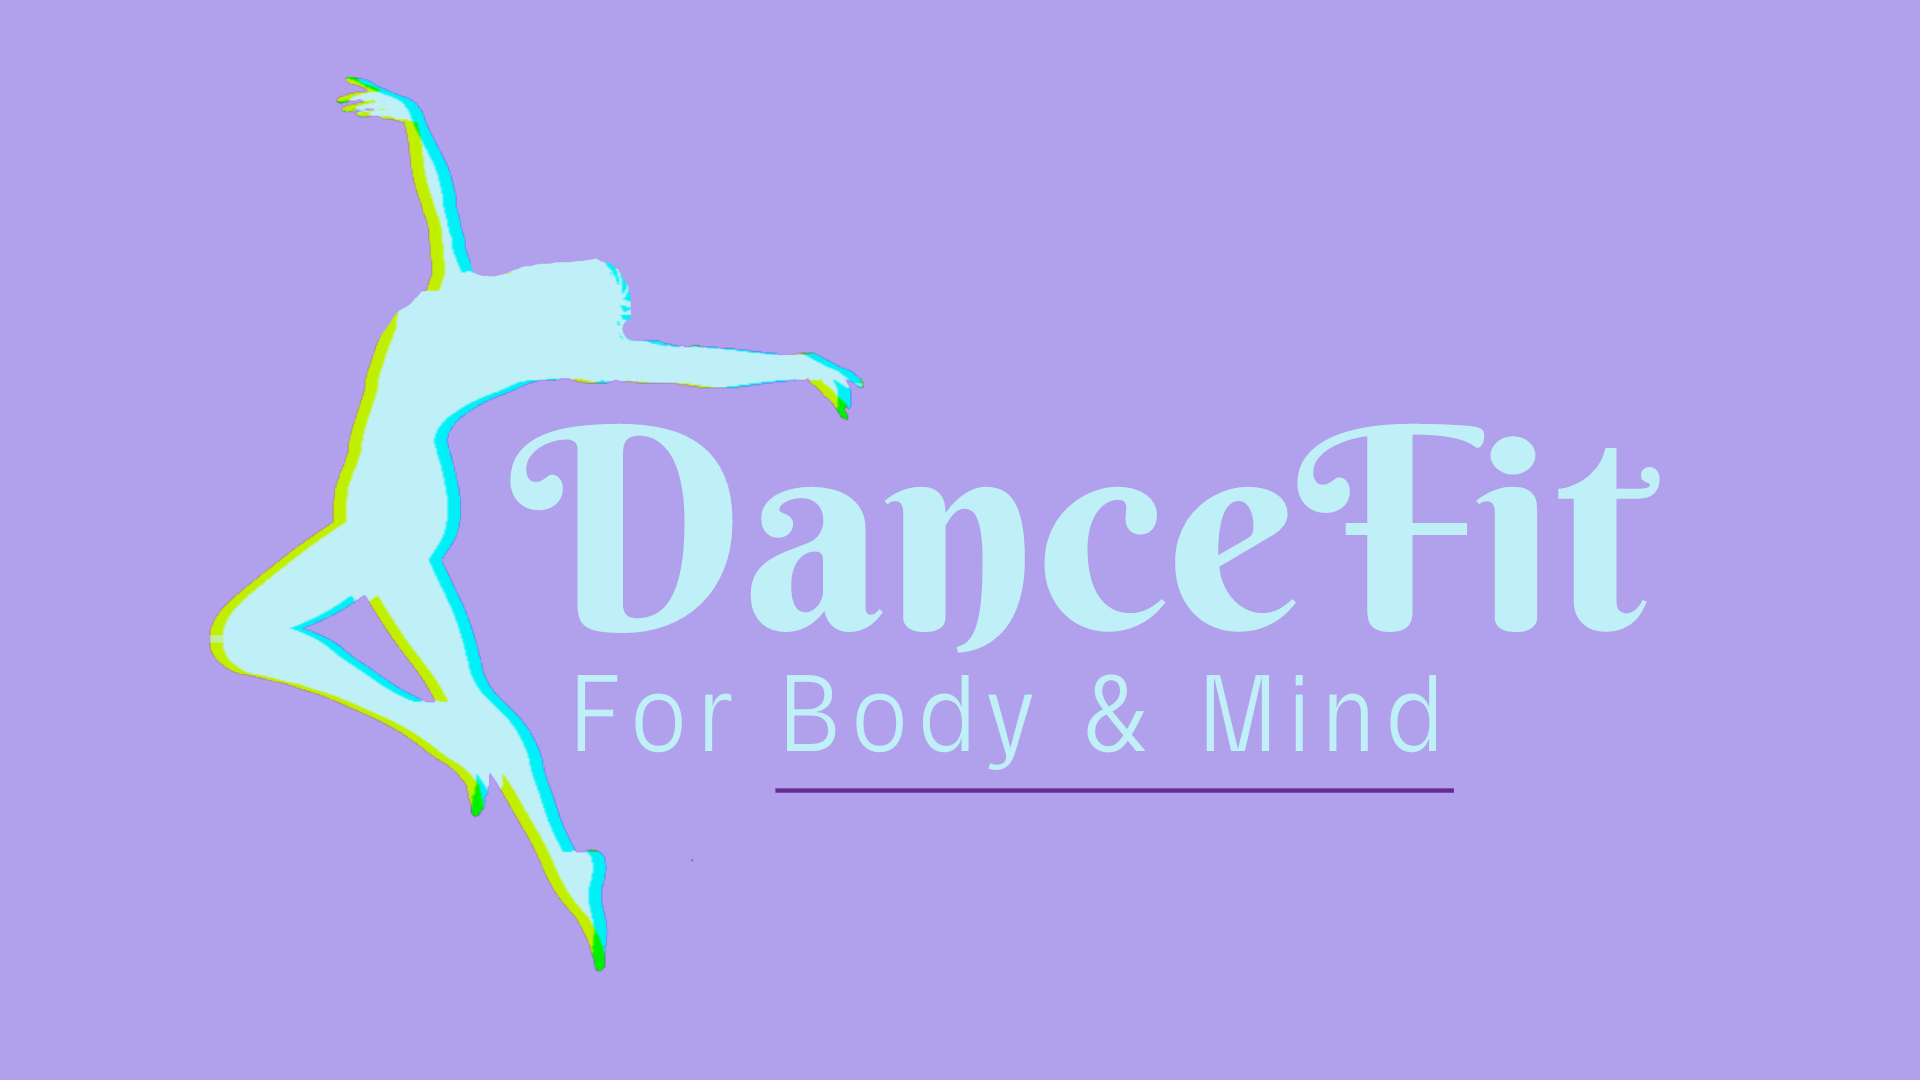 Silhouette of dancer next to text "DanceFit: For Body & Mind"